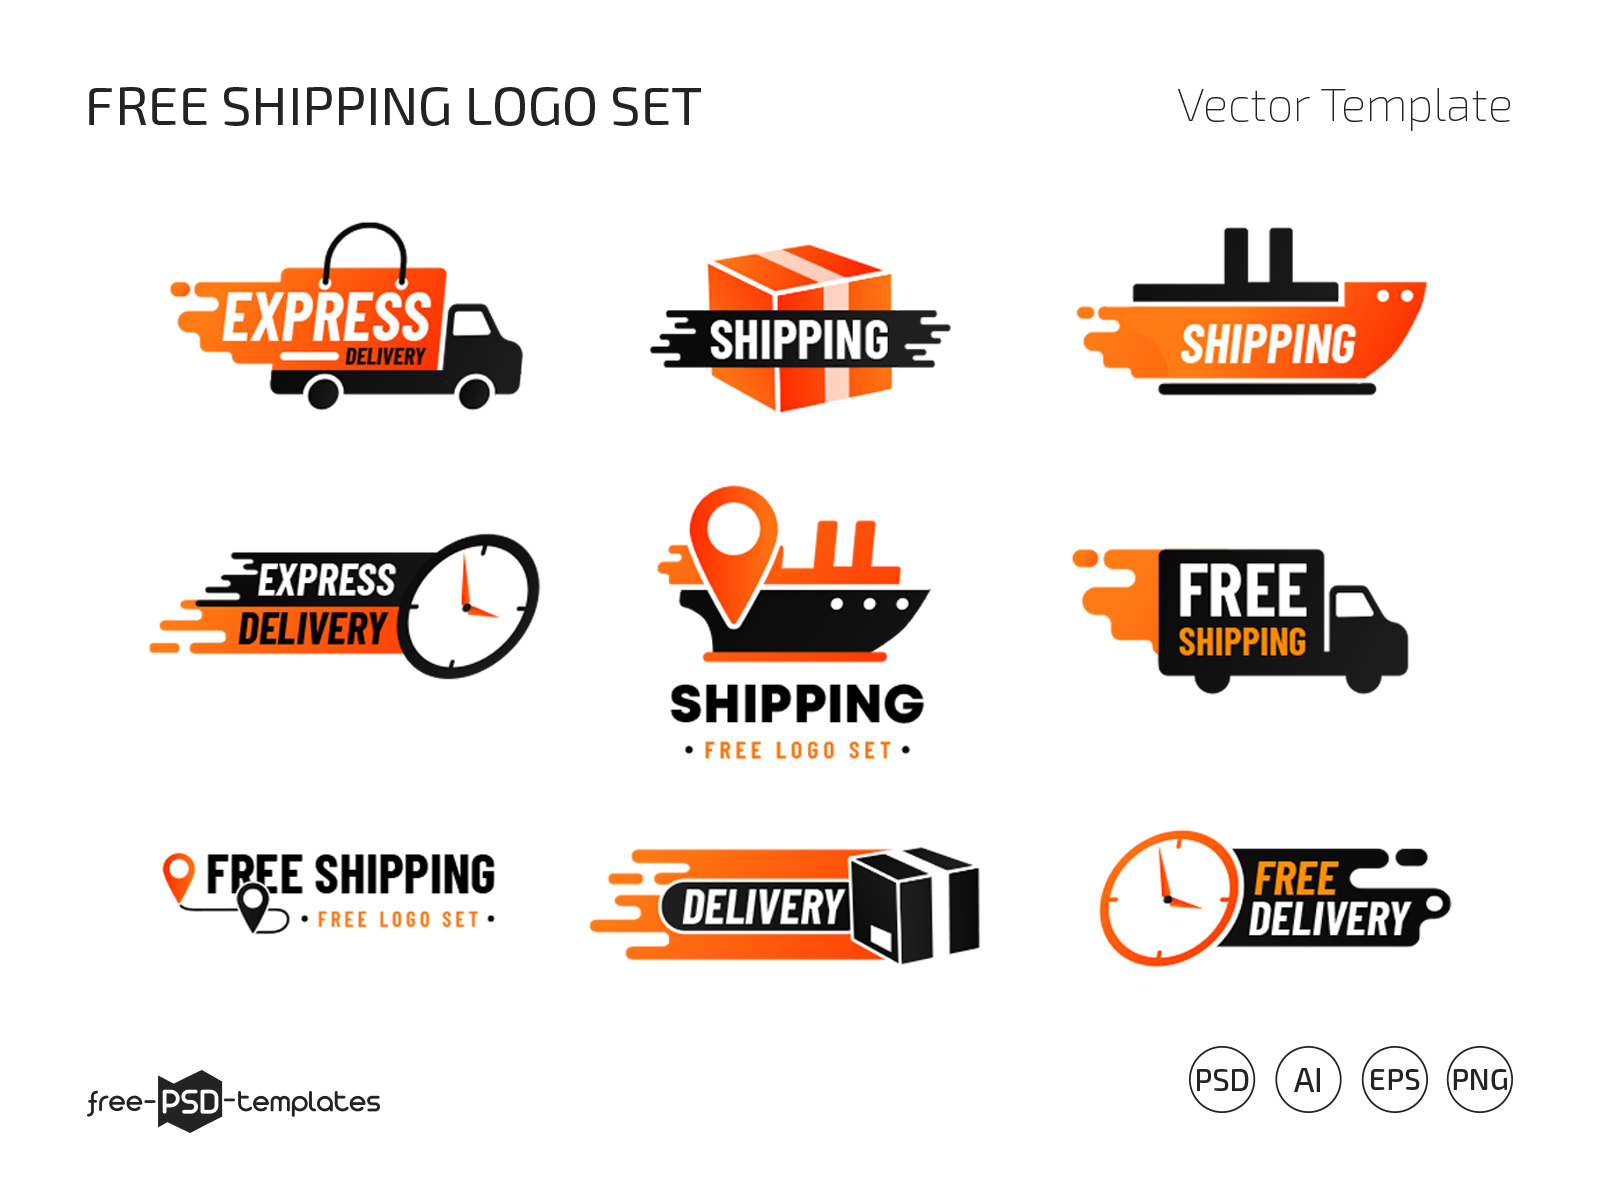 Free Shipping Logo Set (PSD, AI, EPS, PNG) by Free PSD Templates